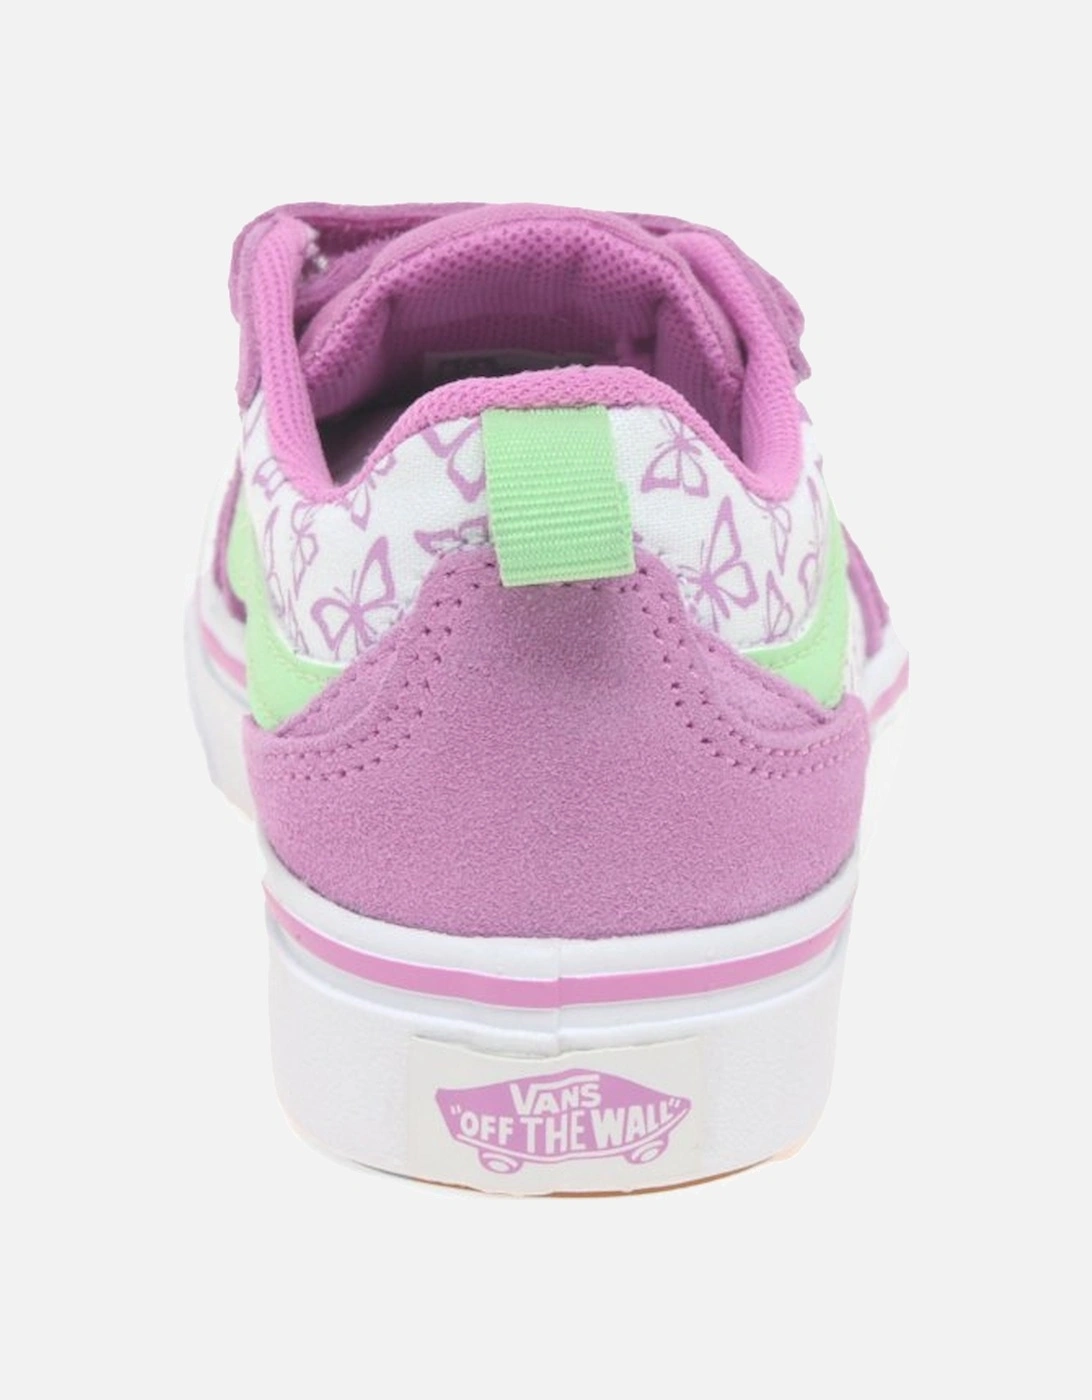 Comfycush V Girls Youth Canvas Shoes